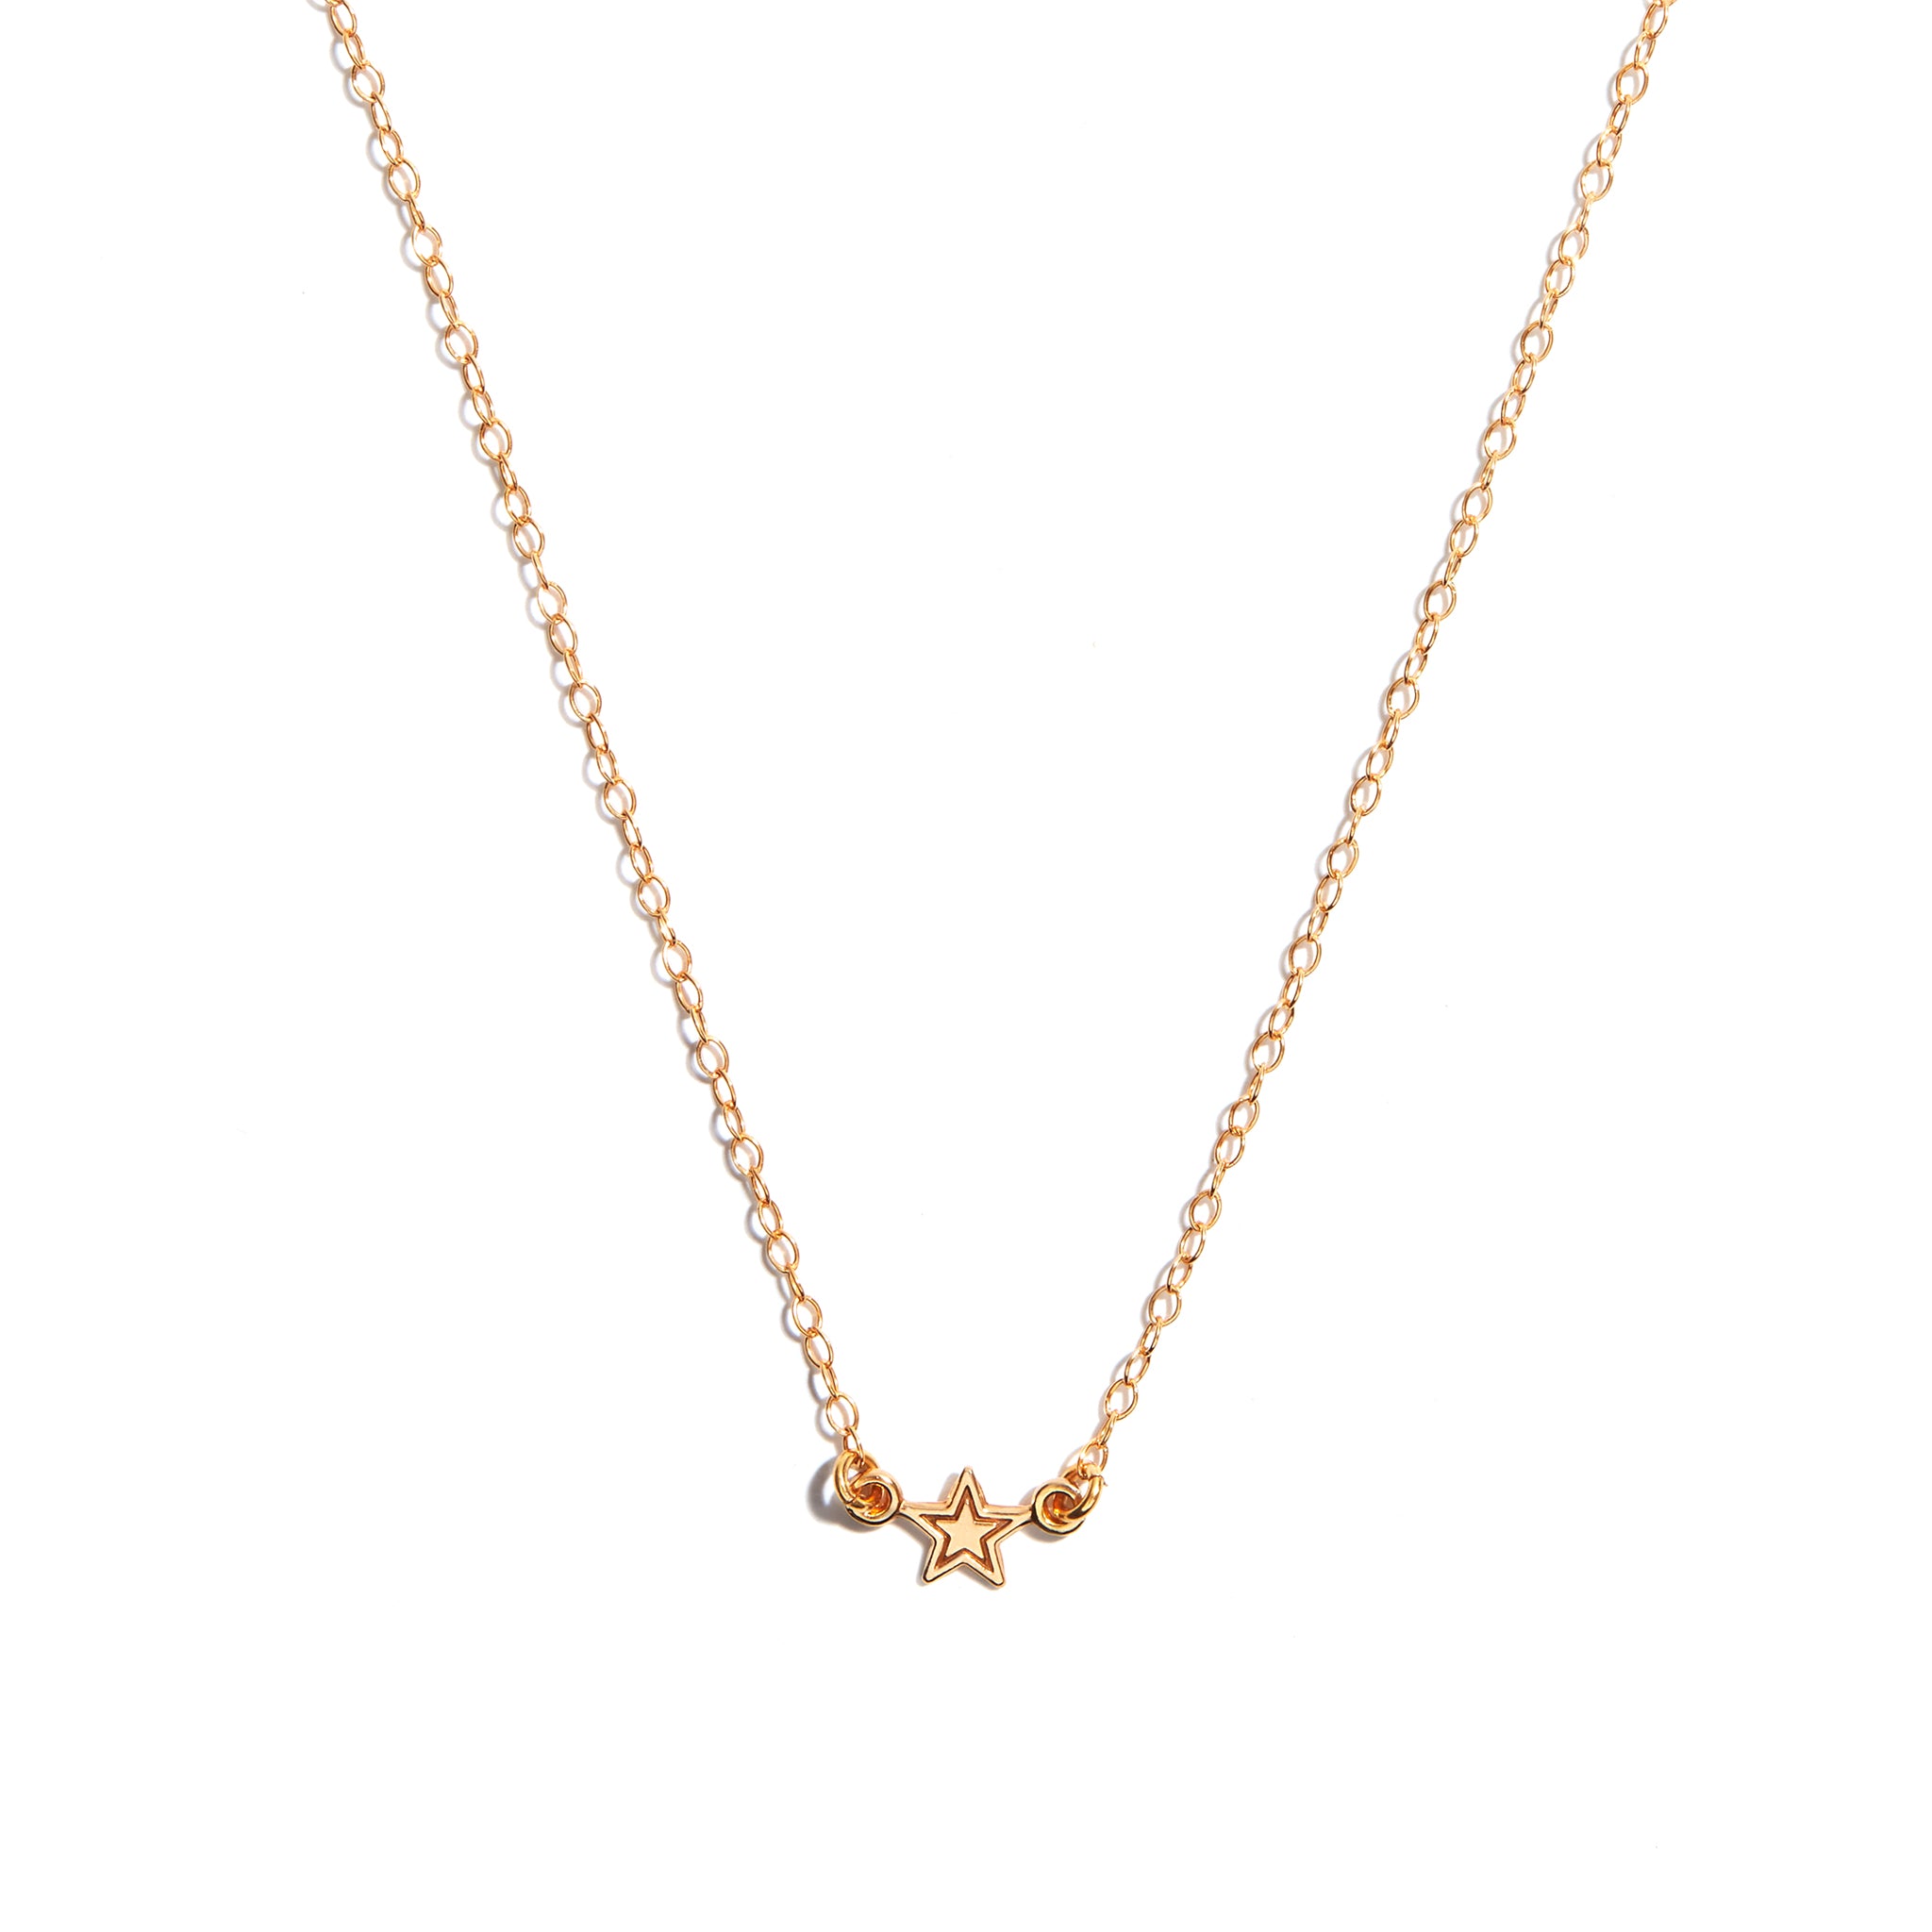 Delicate small gold star pendant made from high-quality 14 carat gold-fill, adding a touch of celestial charm to your look.